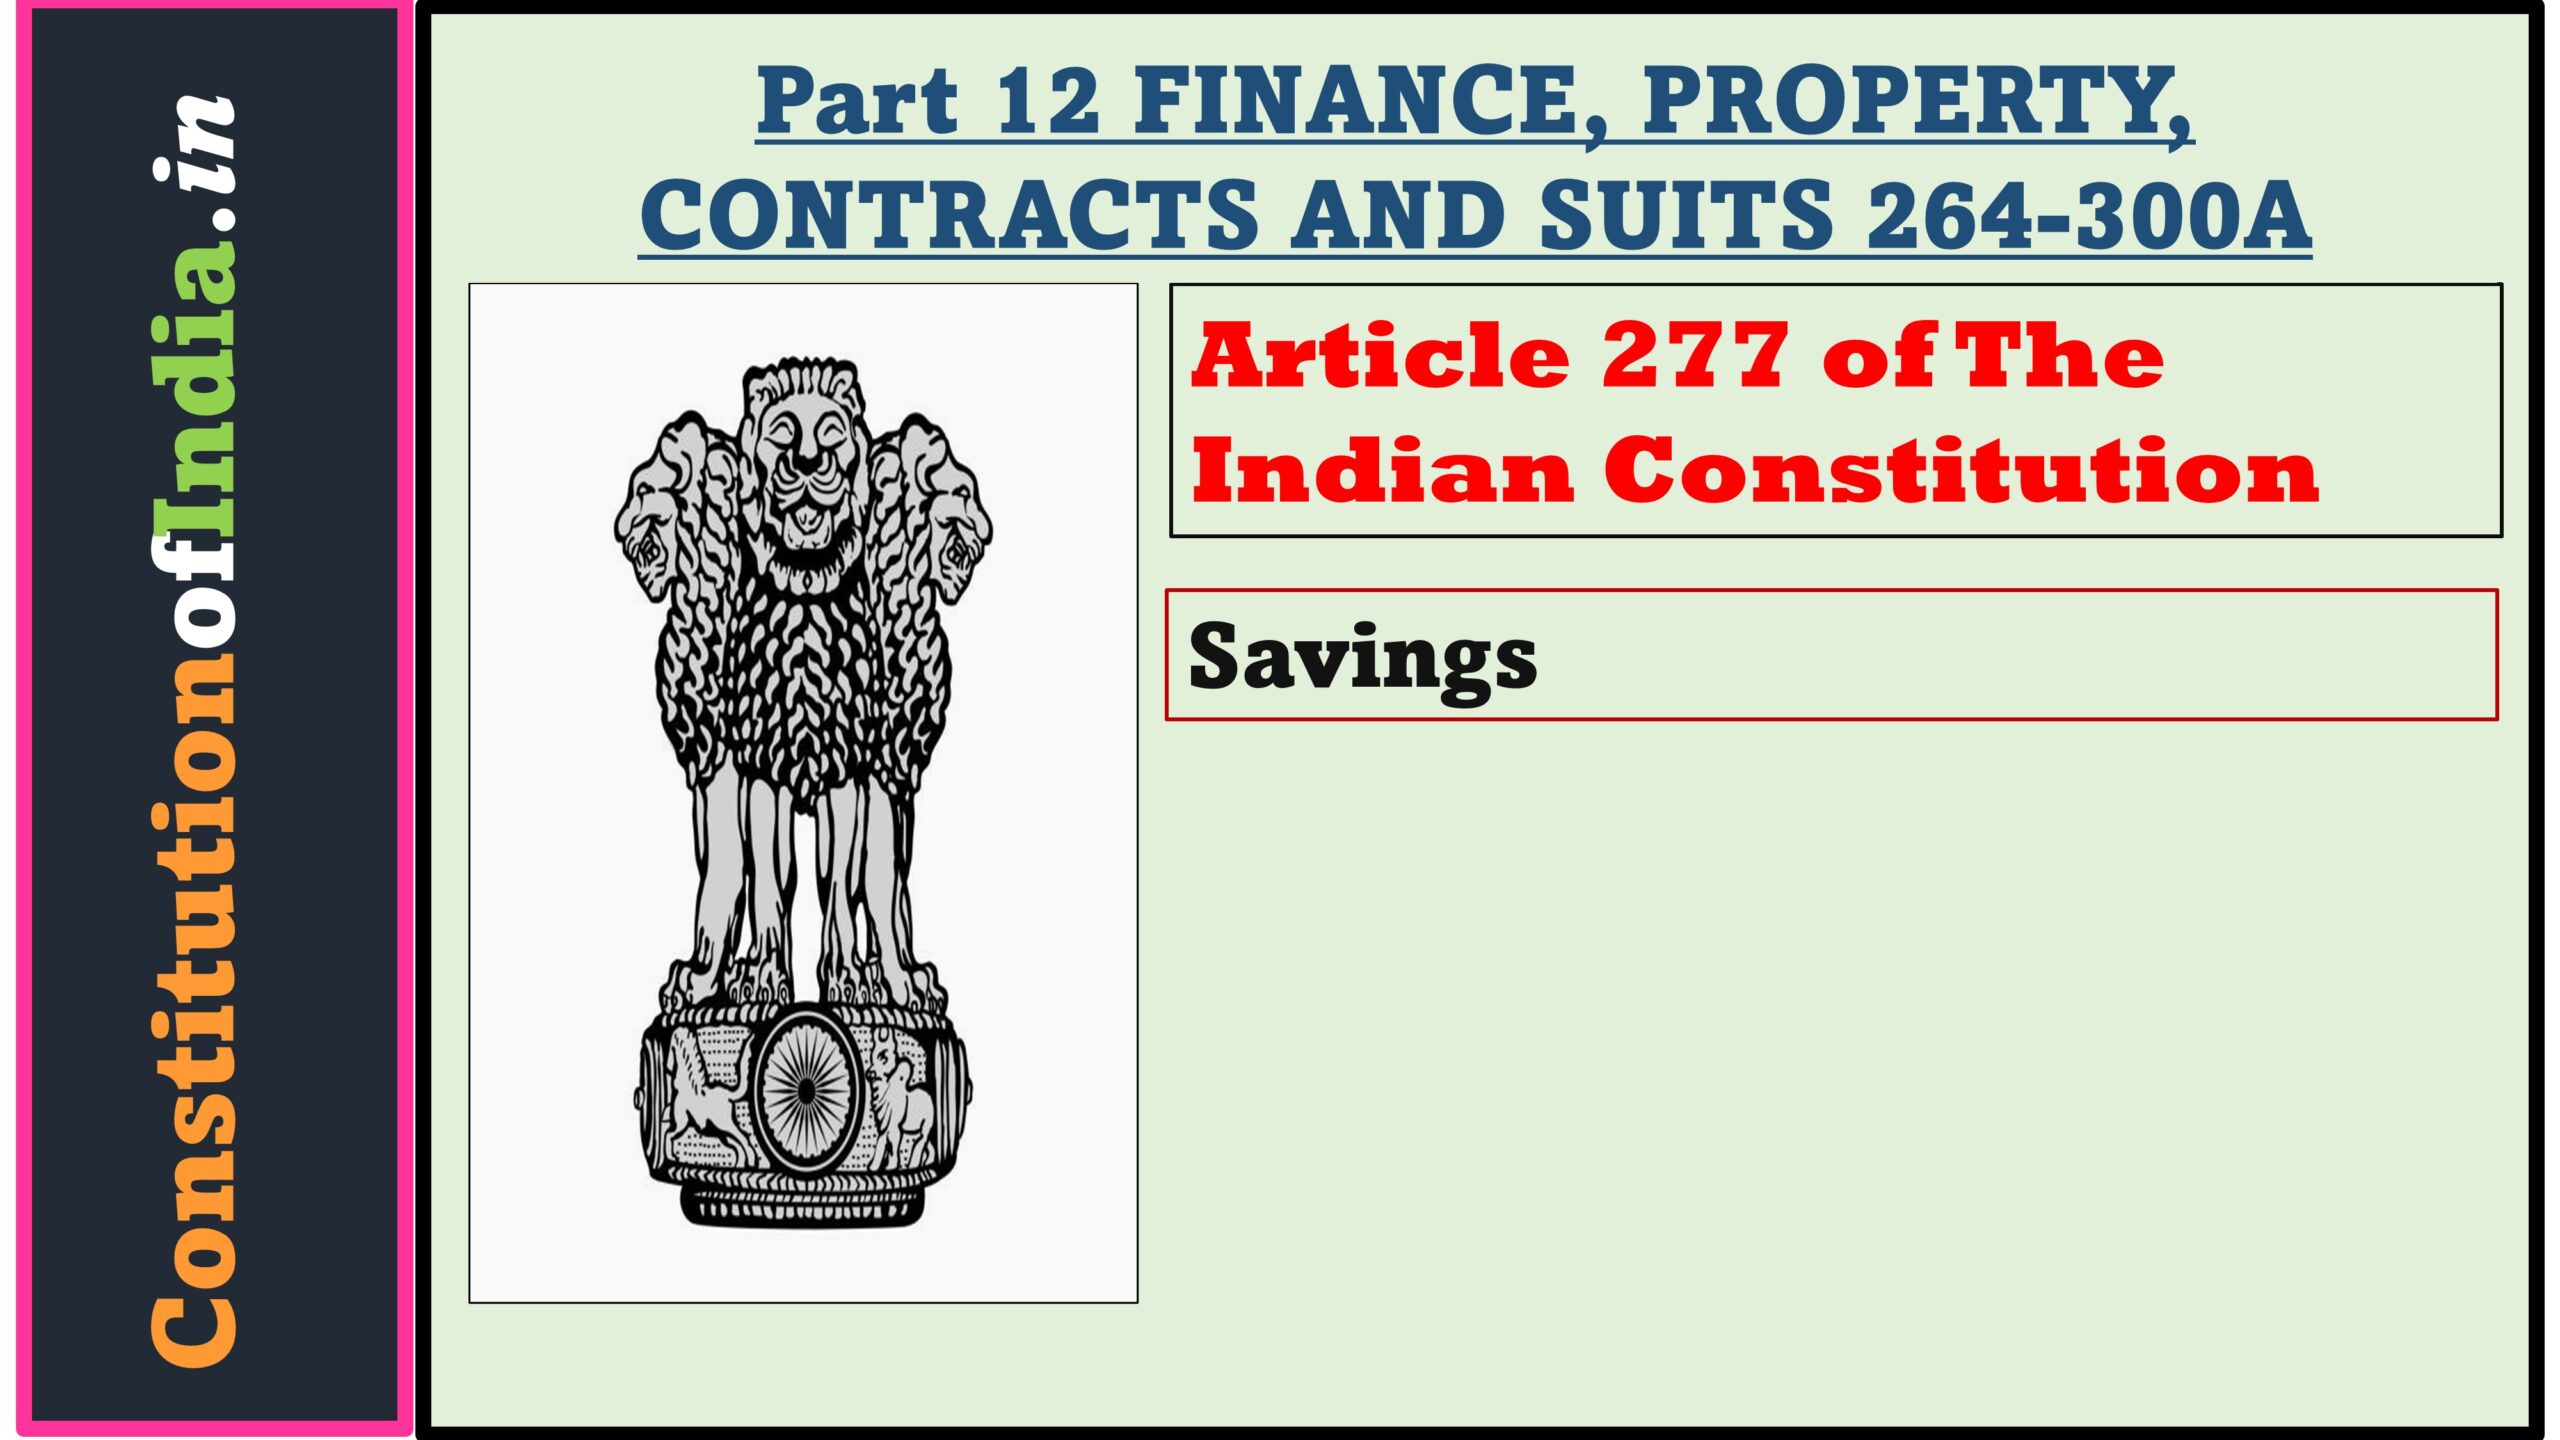 Article 277 of The Indian Constitution